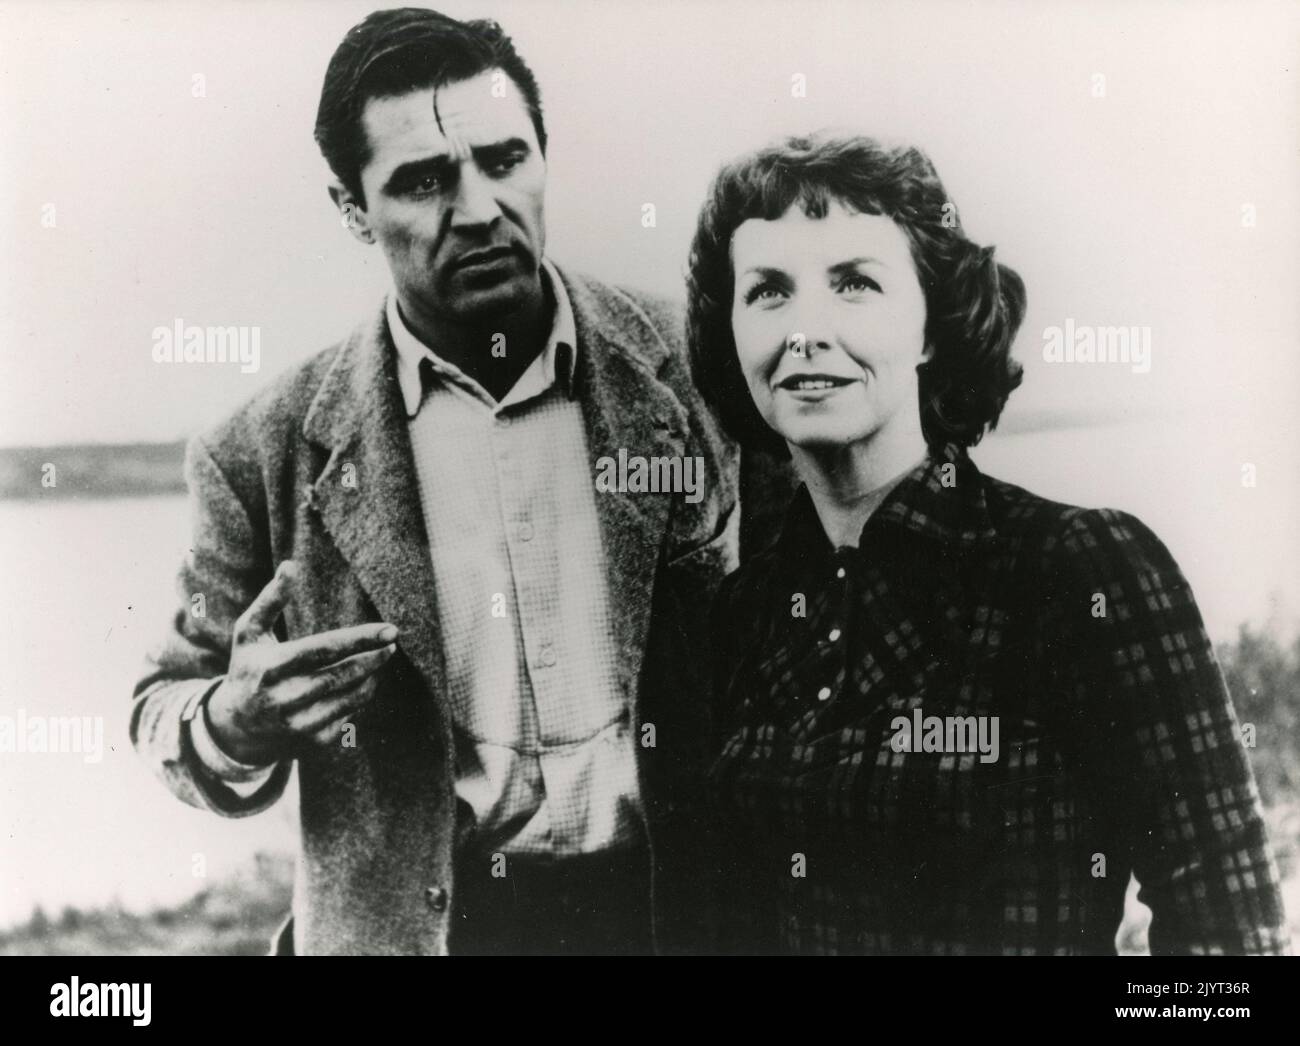 American actor Steve Cochran and actress Betsy Blair in the movie The Cry (Il grido), Italy 1957 Stock Photo